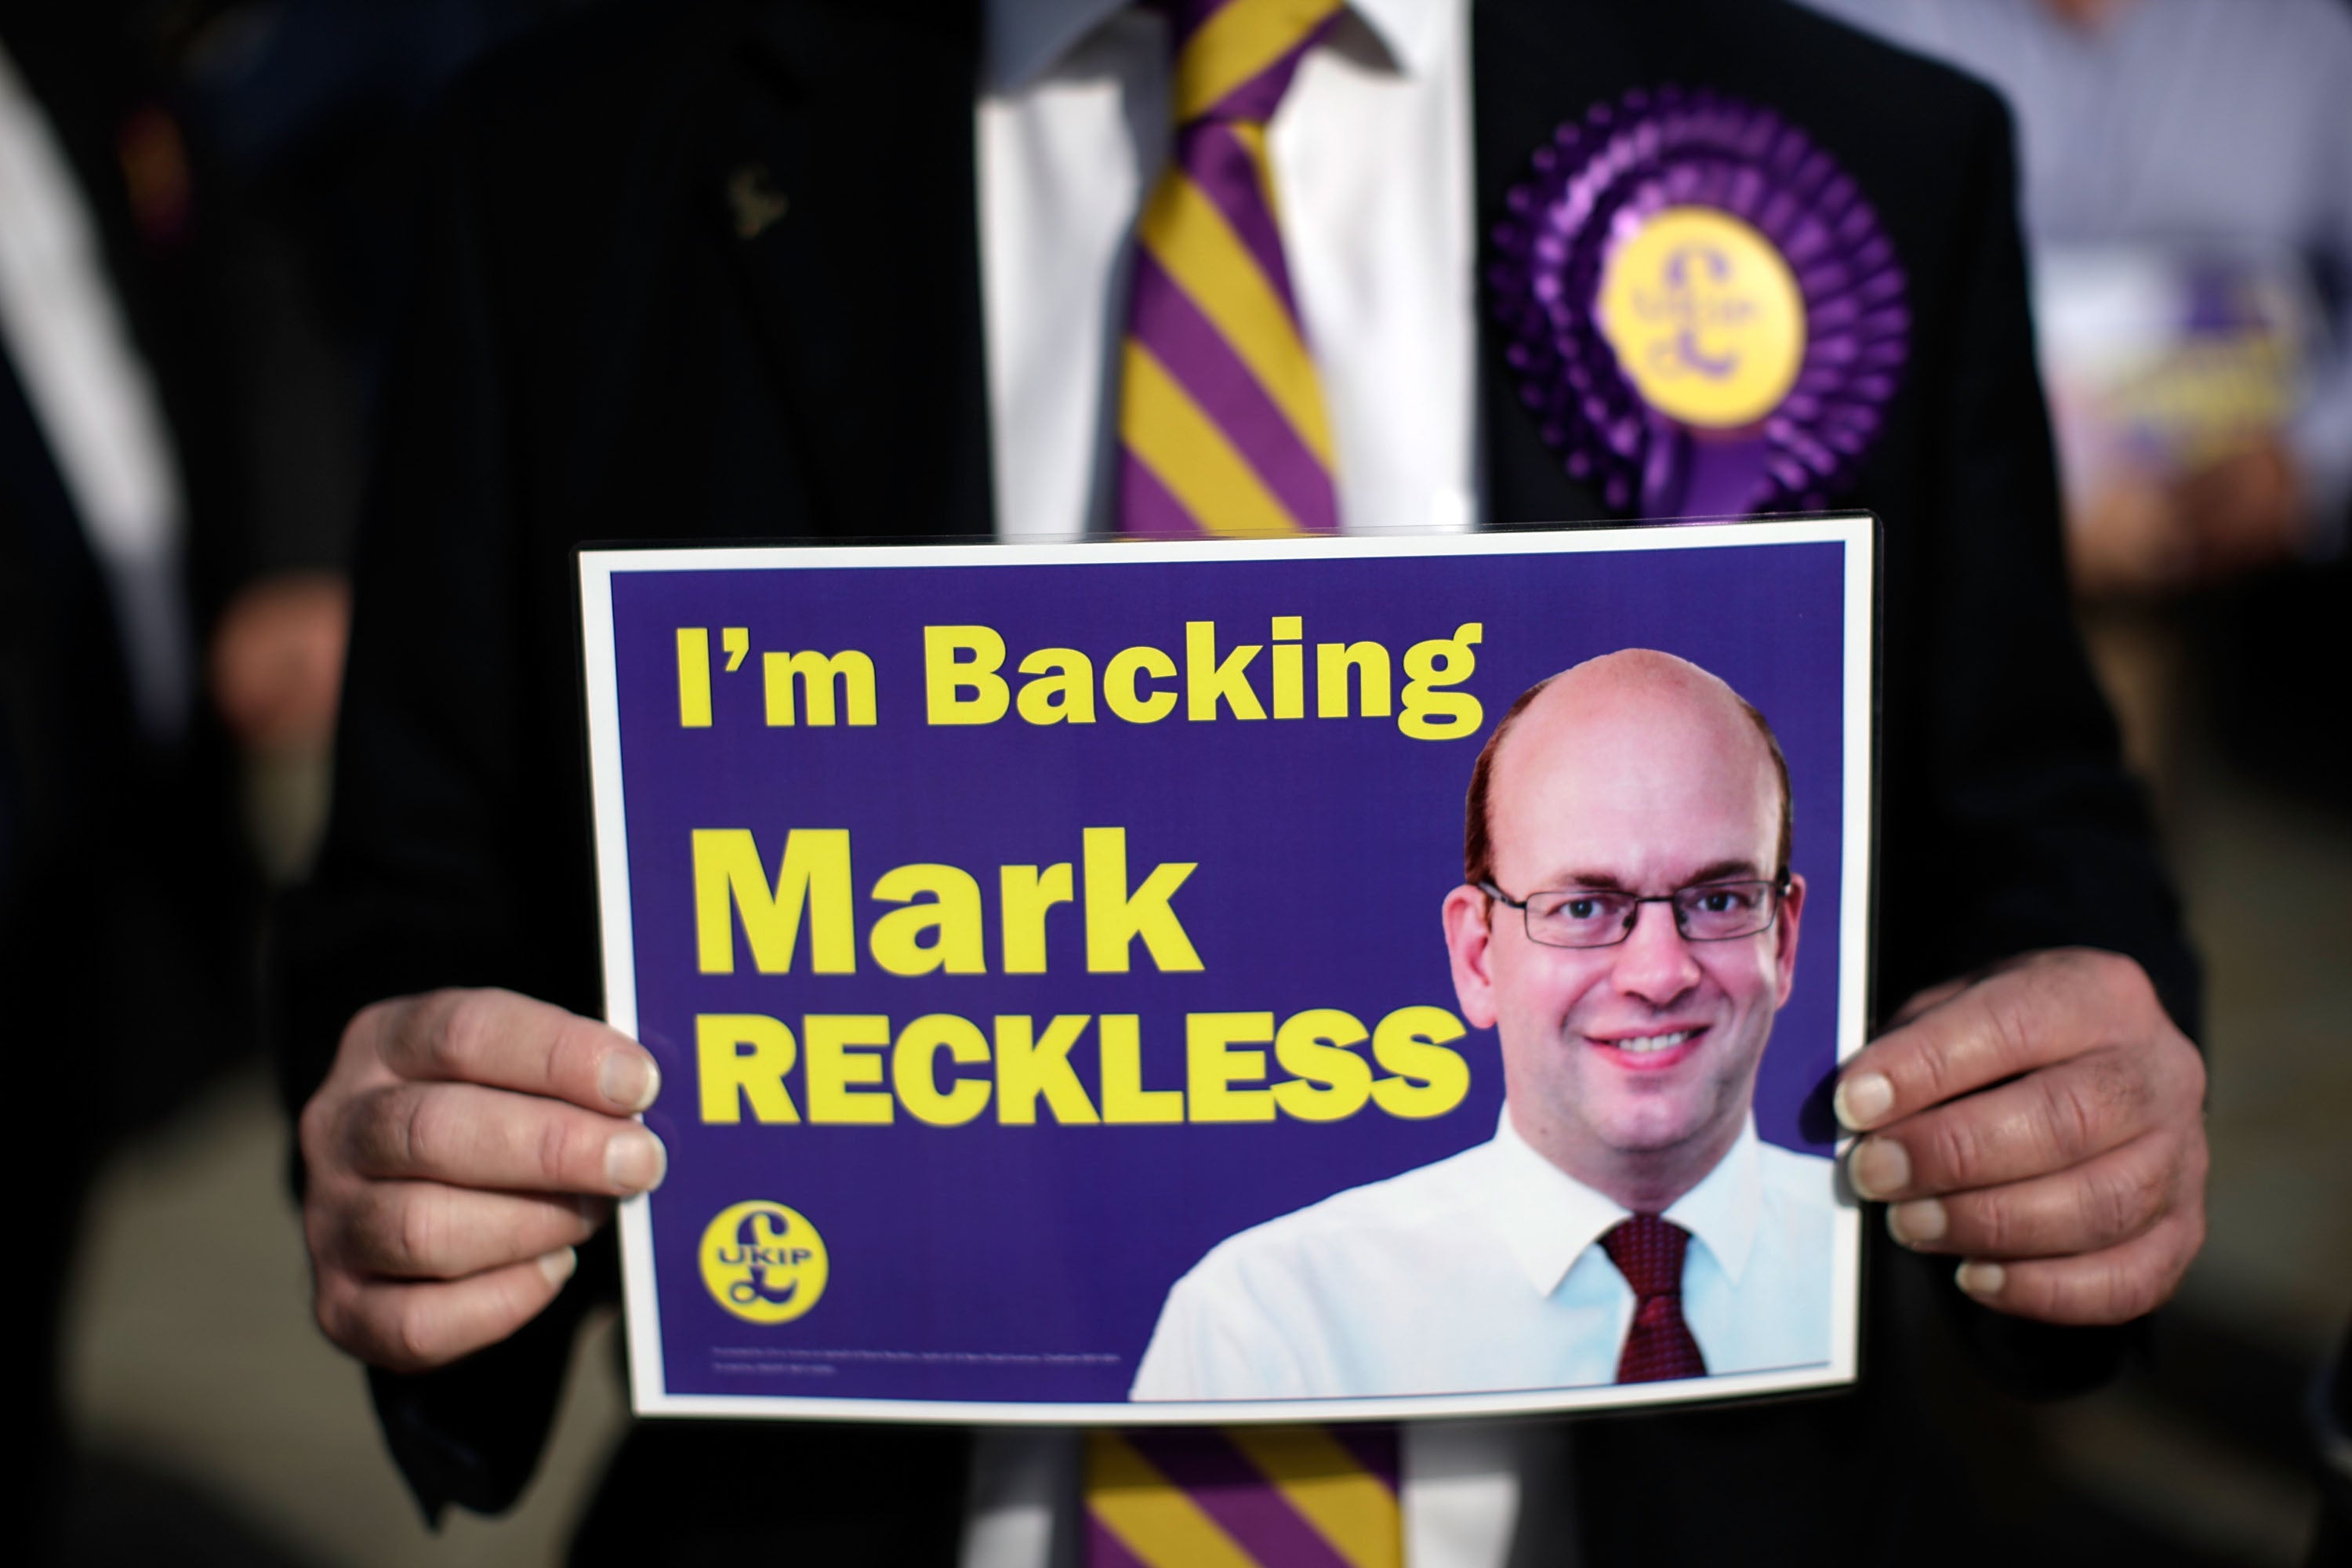 Ukip candidate Mark Reckless has a nine-point lead over the Tories for his Kent seat, a new poll shows